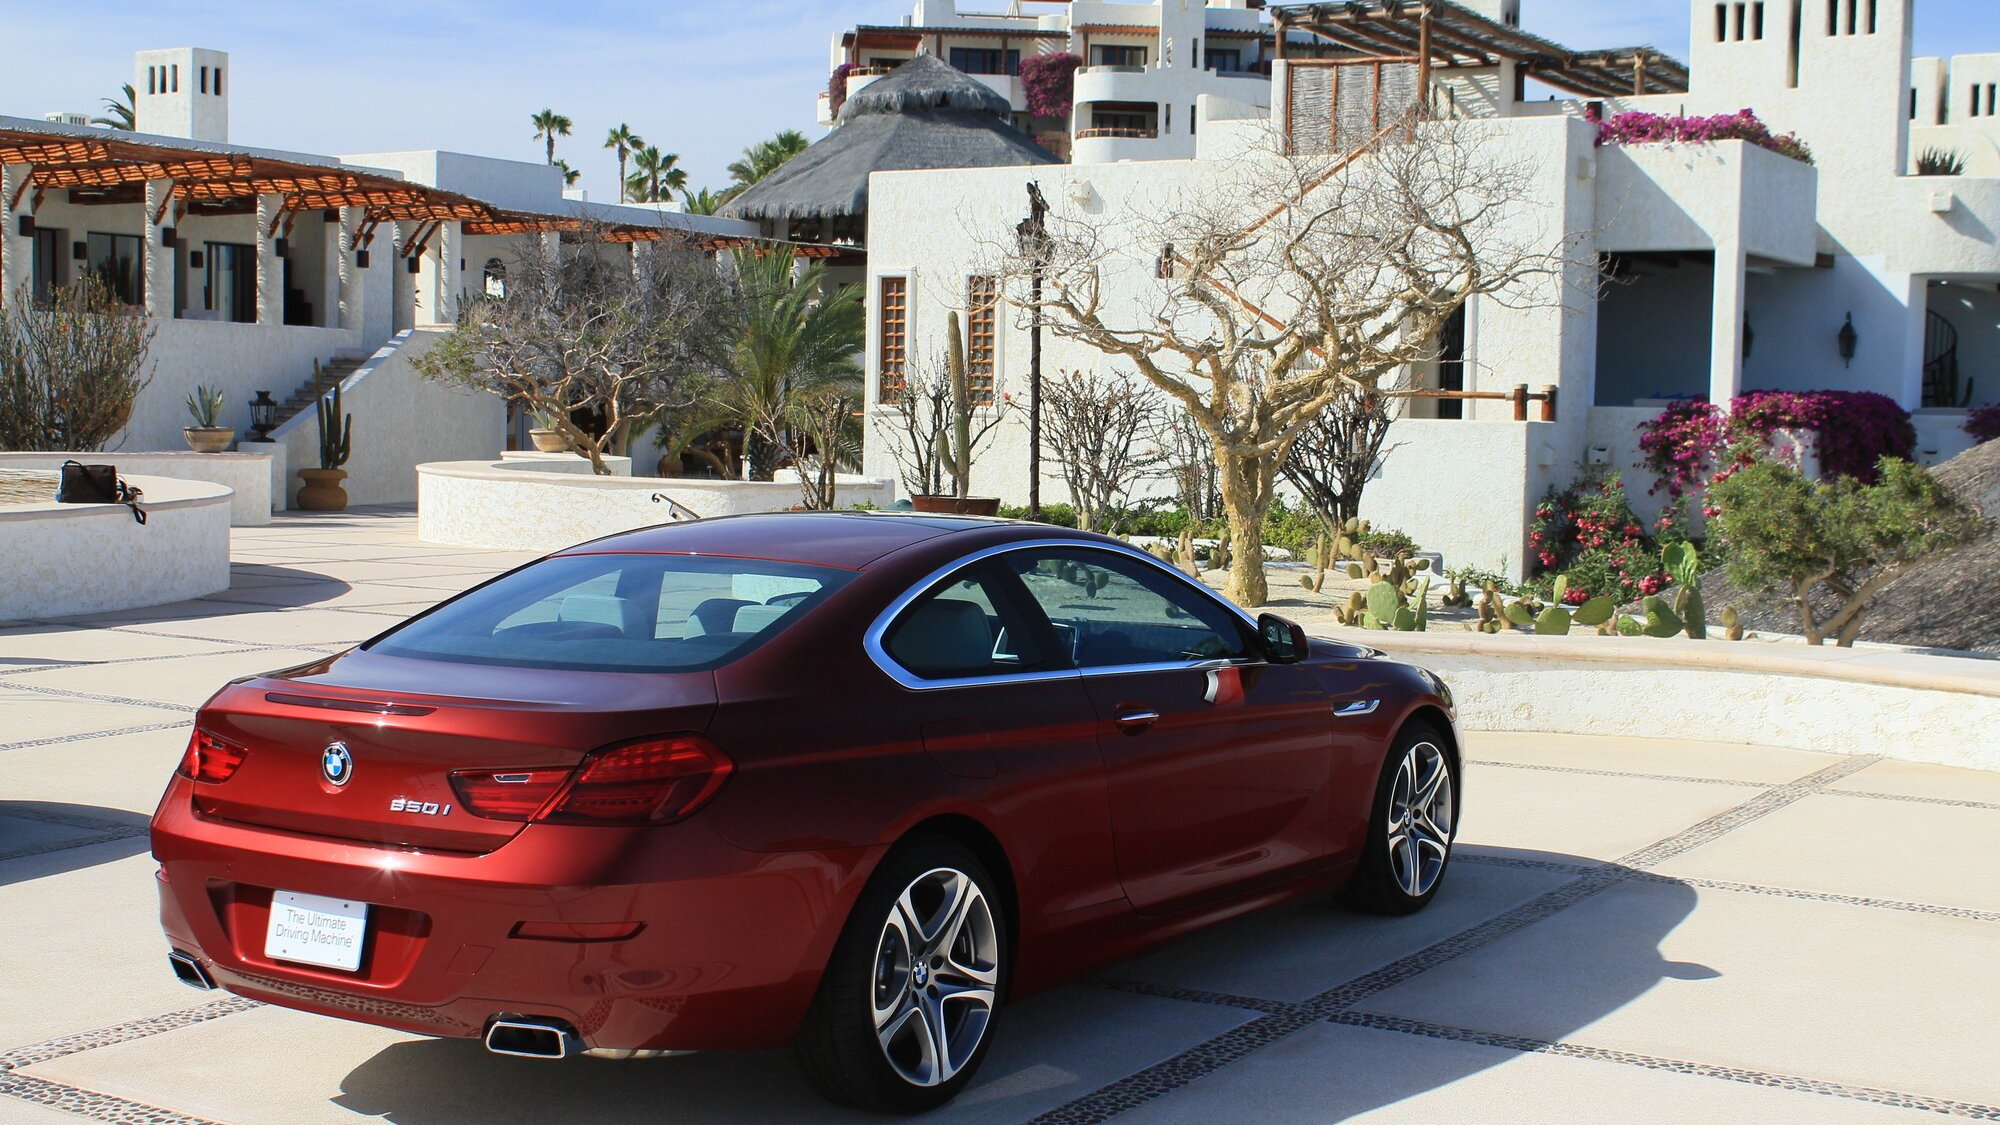 2012 BMW 650i Coupe Live From Mexico: Gallery.